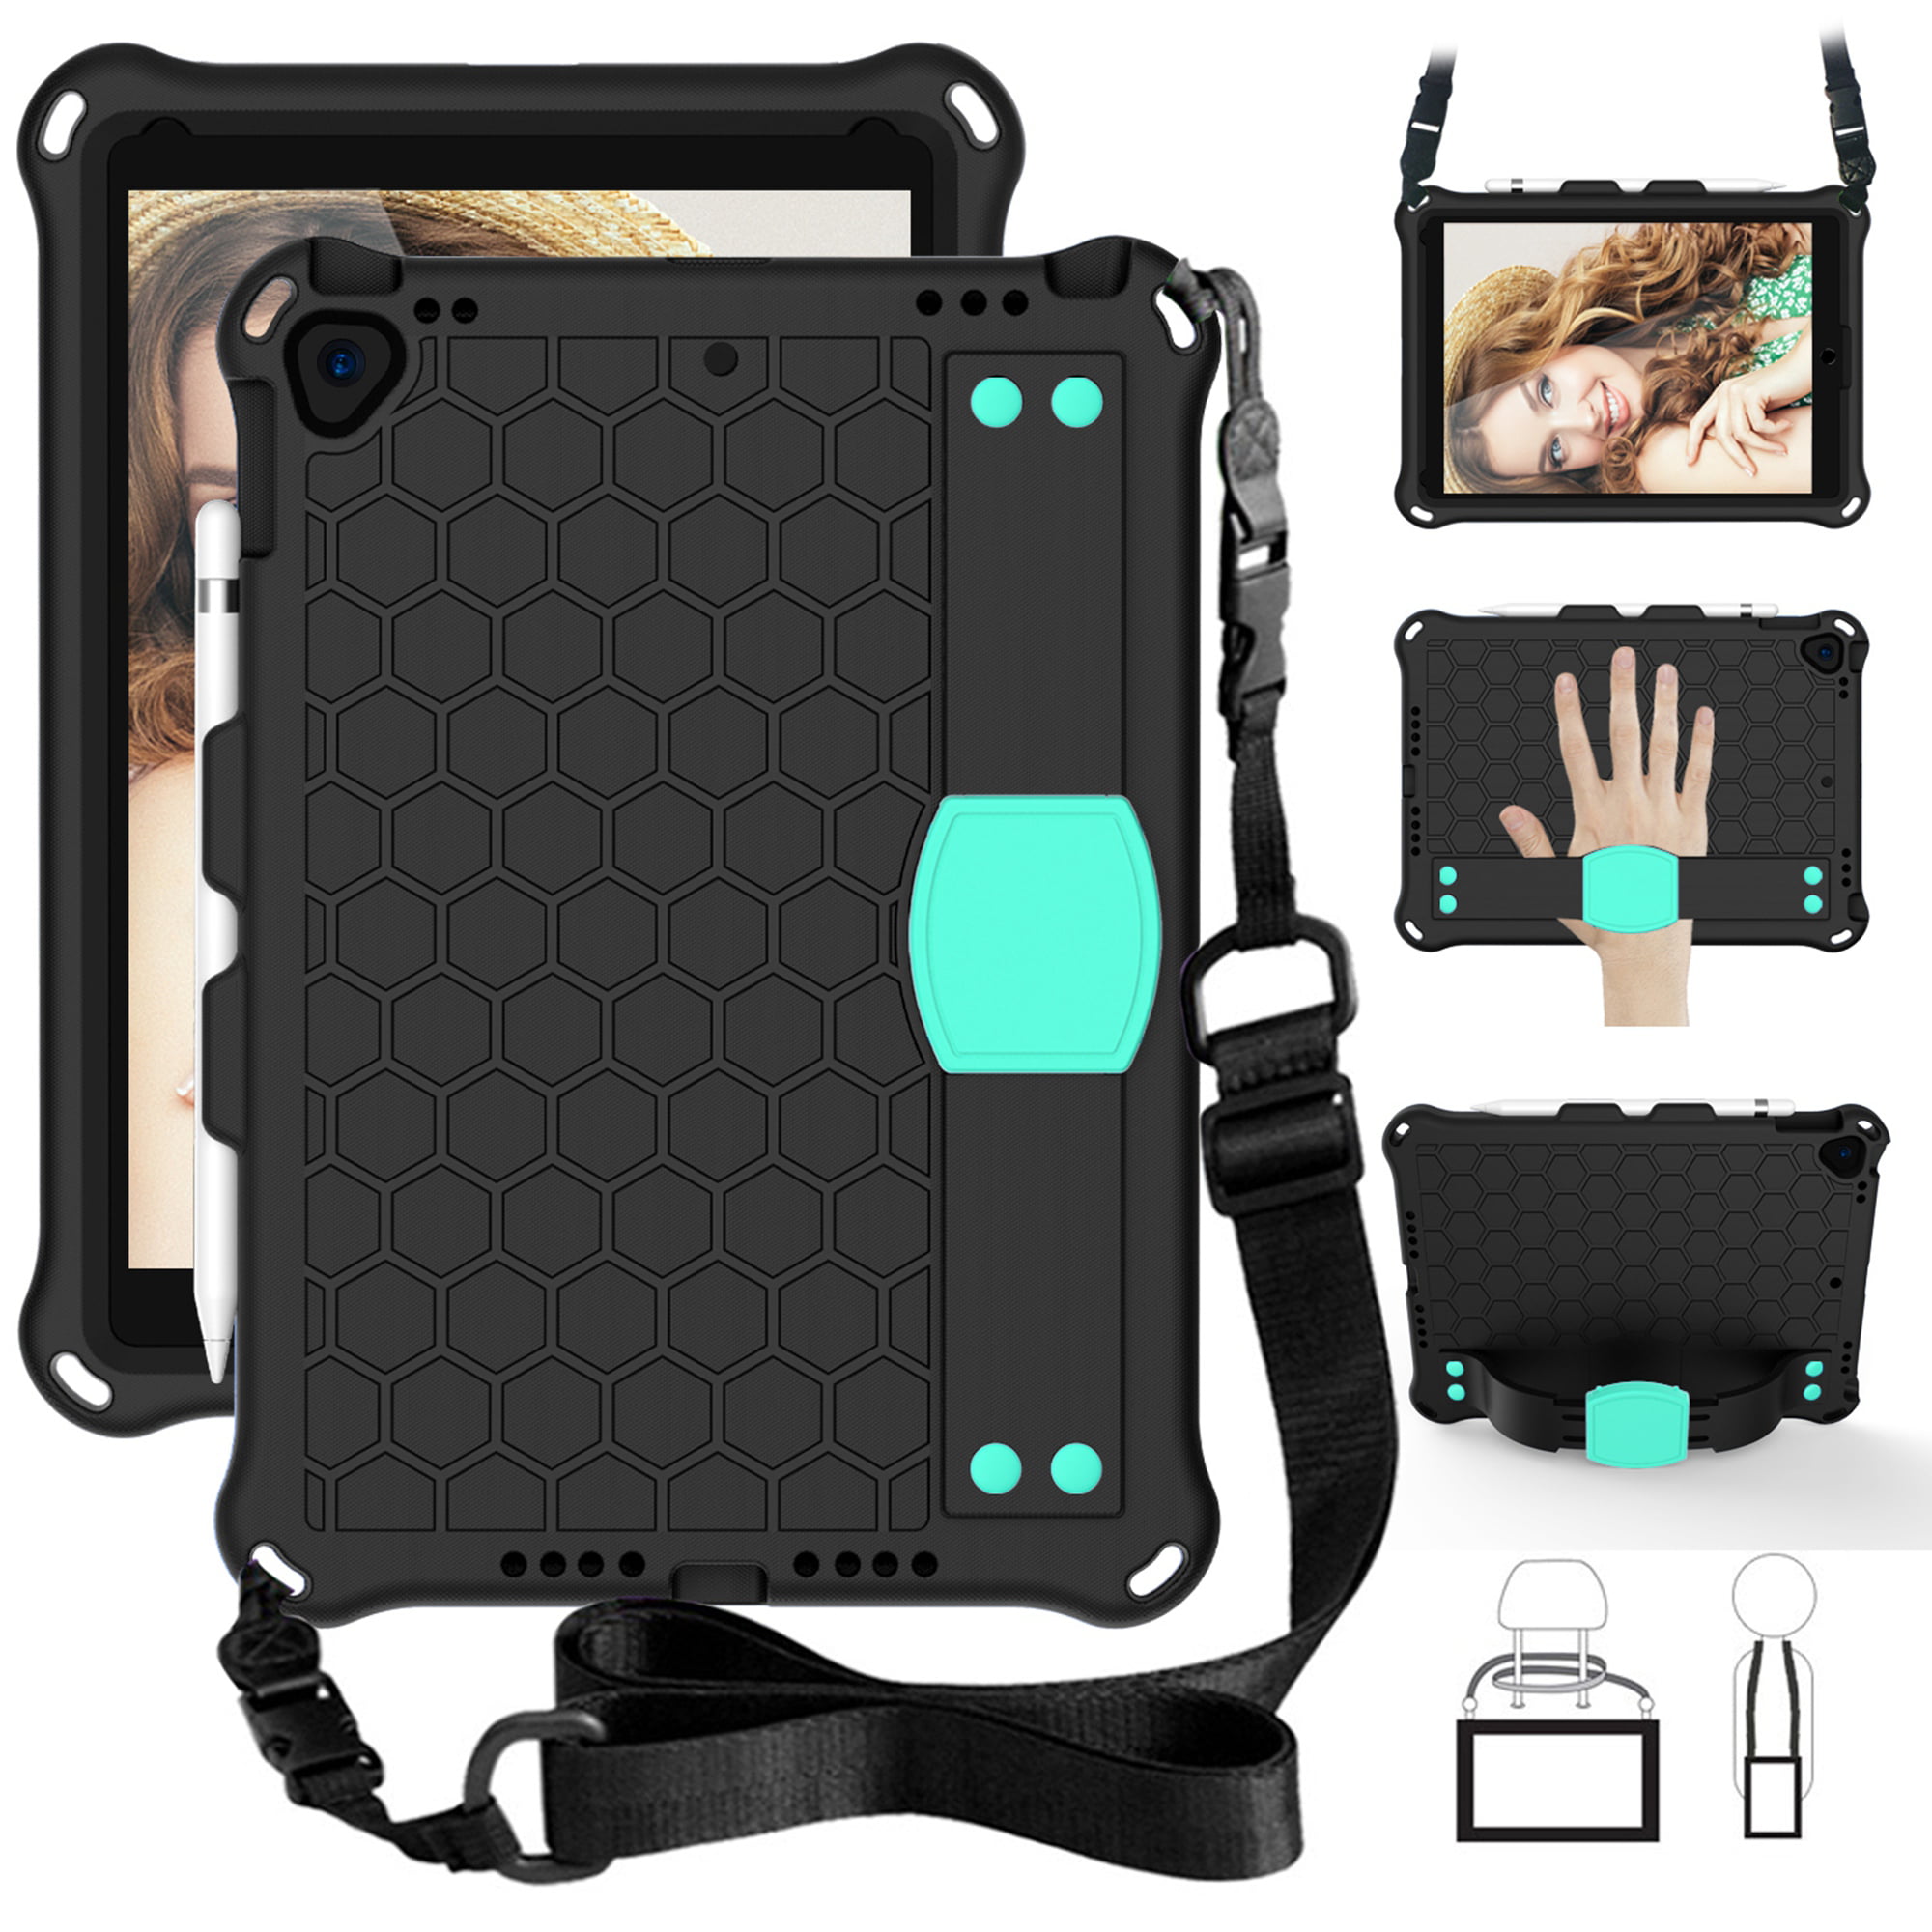 iPad 7th Generation Cases with Shoulder Strap, iPad 10.2" 2019 Case